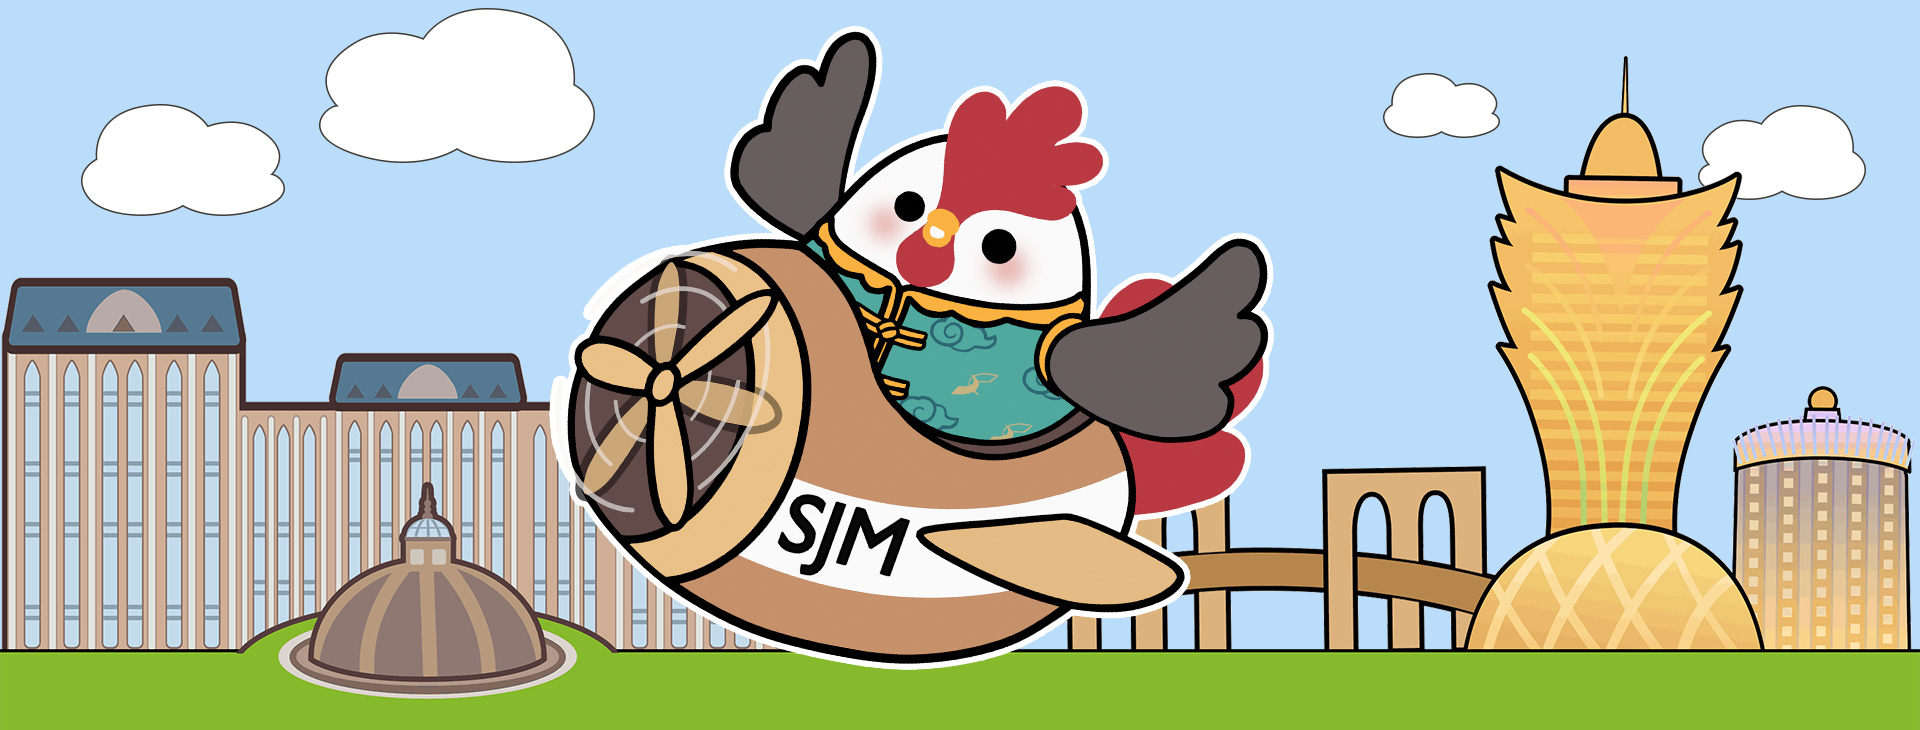 SJM Sam the Rooster